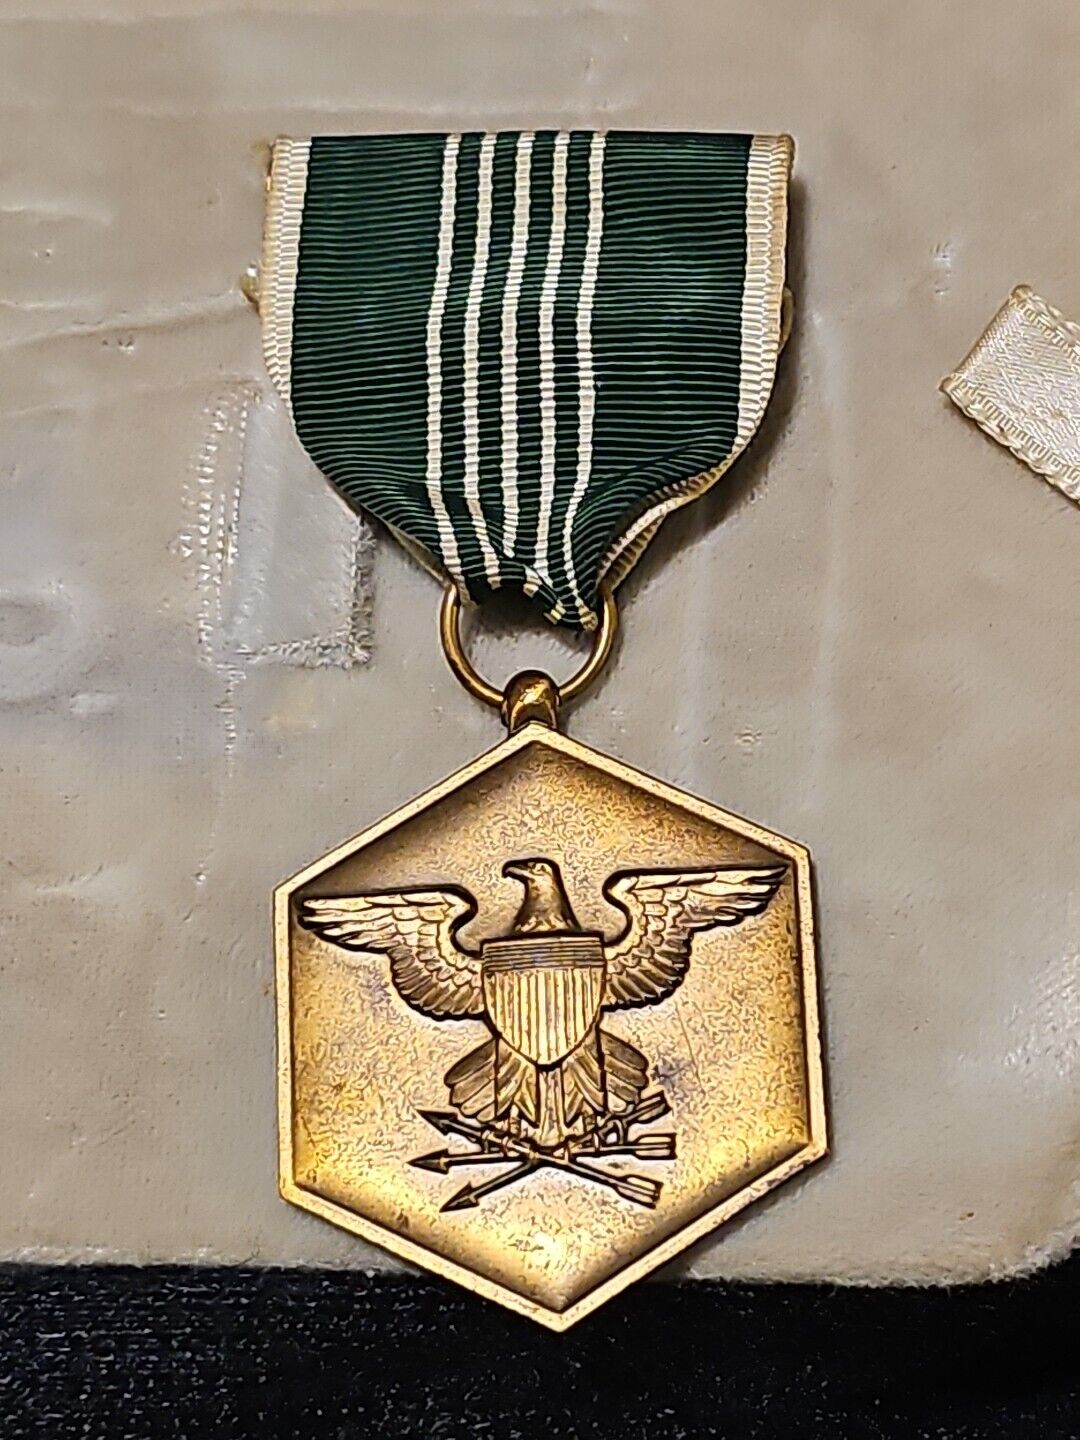 VTG WW2 US Army Military Army Commendation Medal Award For Military Merit